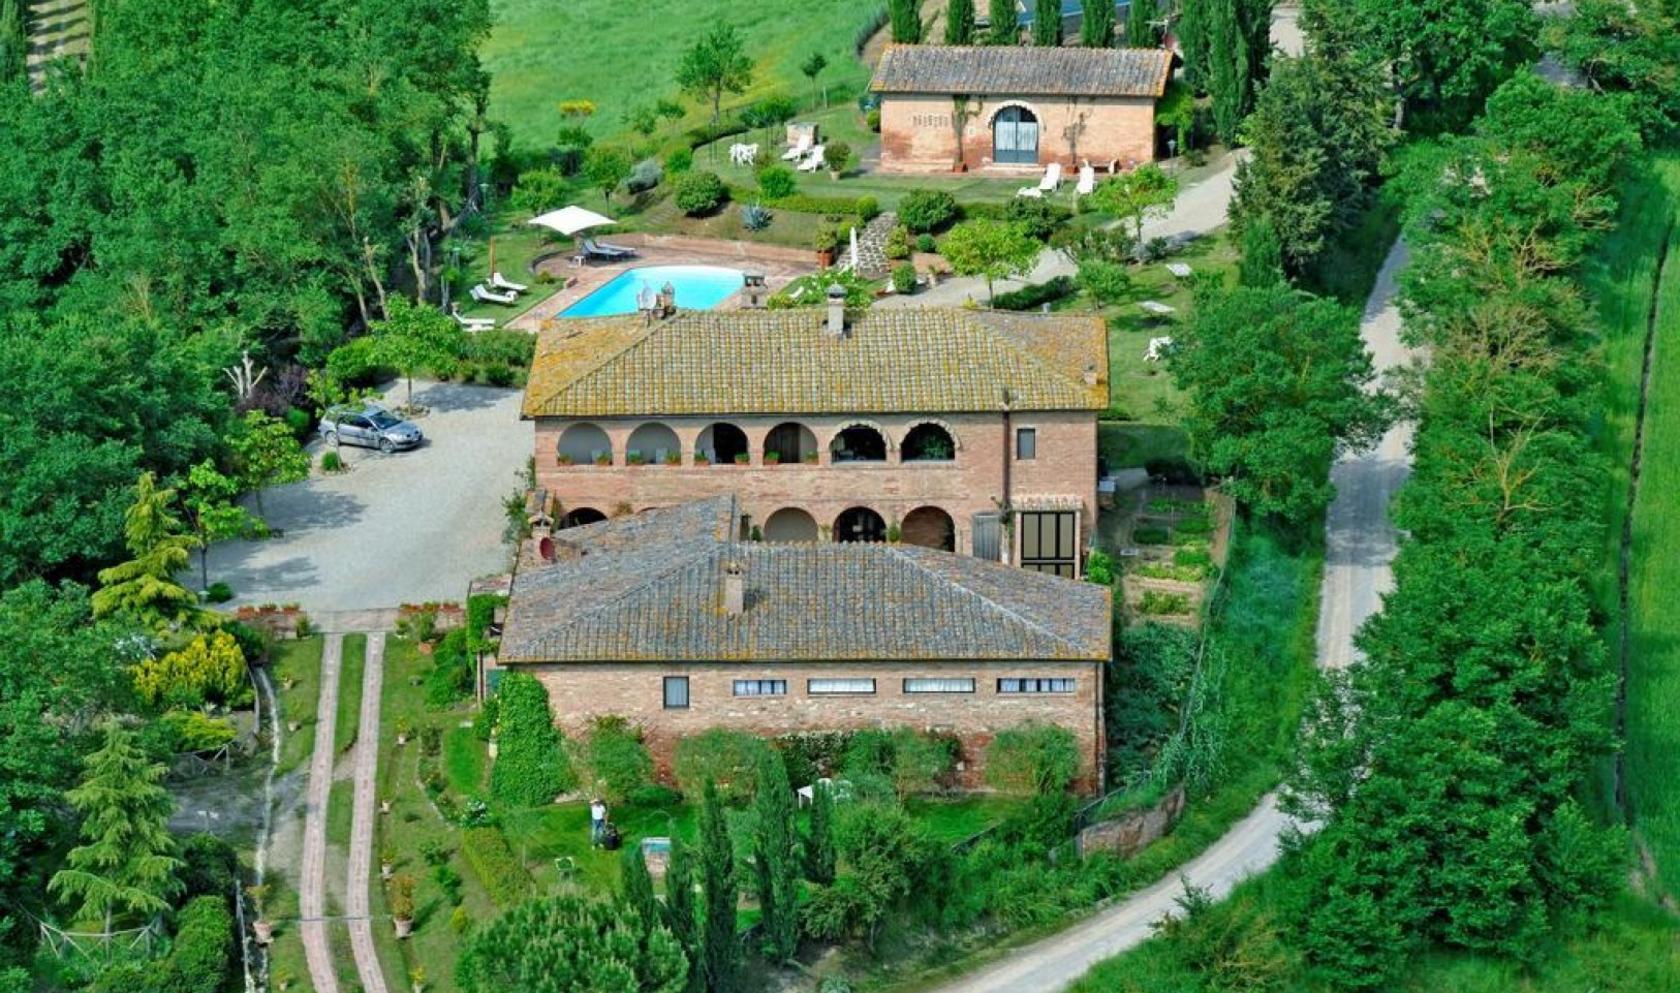 Toscana Immobiliare - Real estate with panoramic view in Tuscany